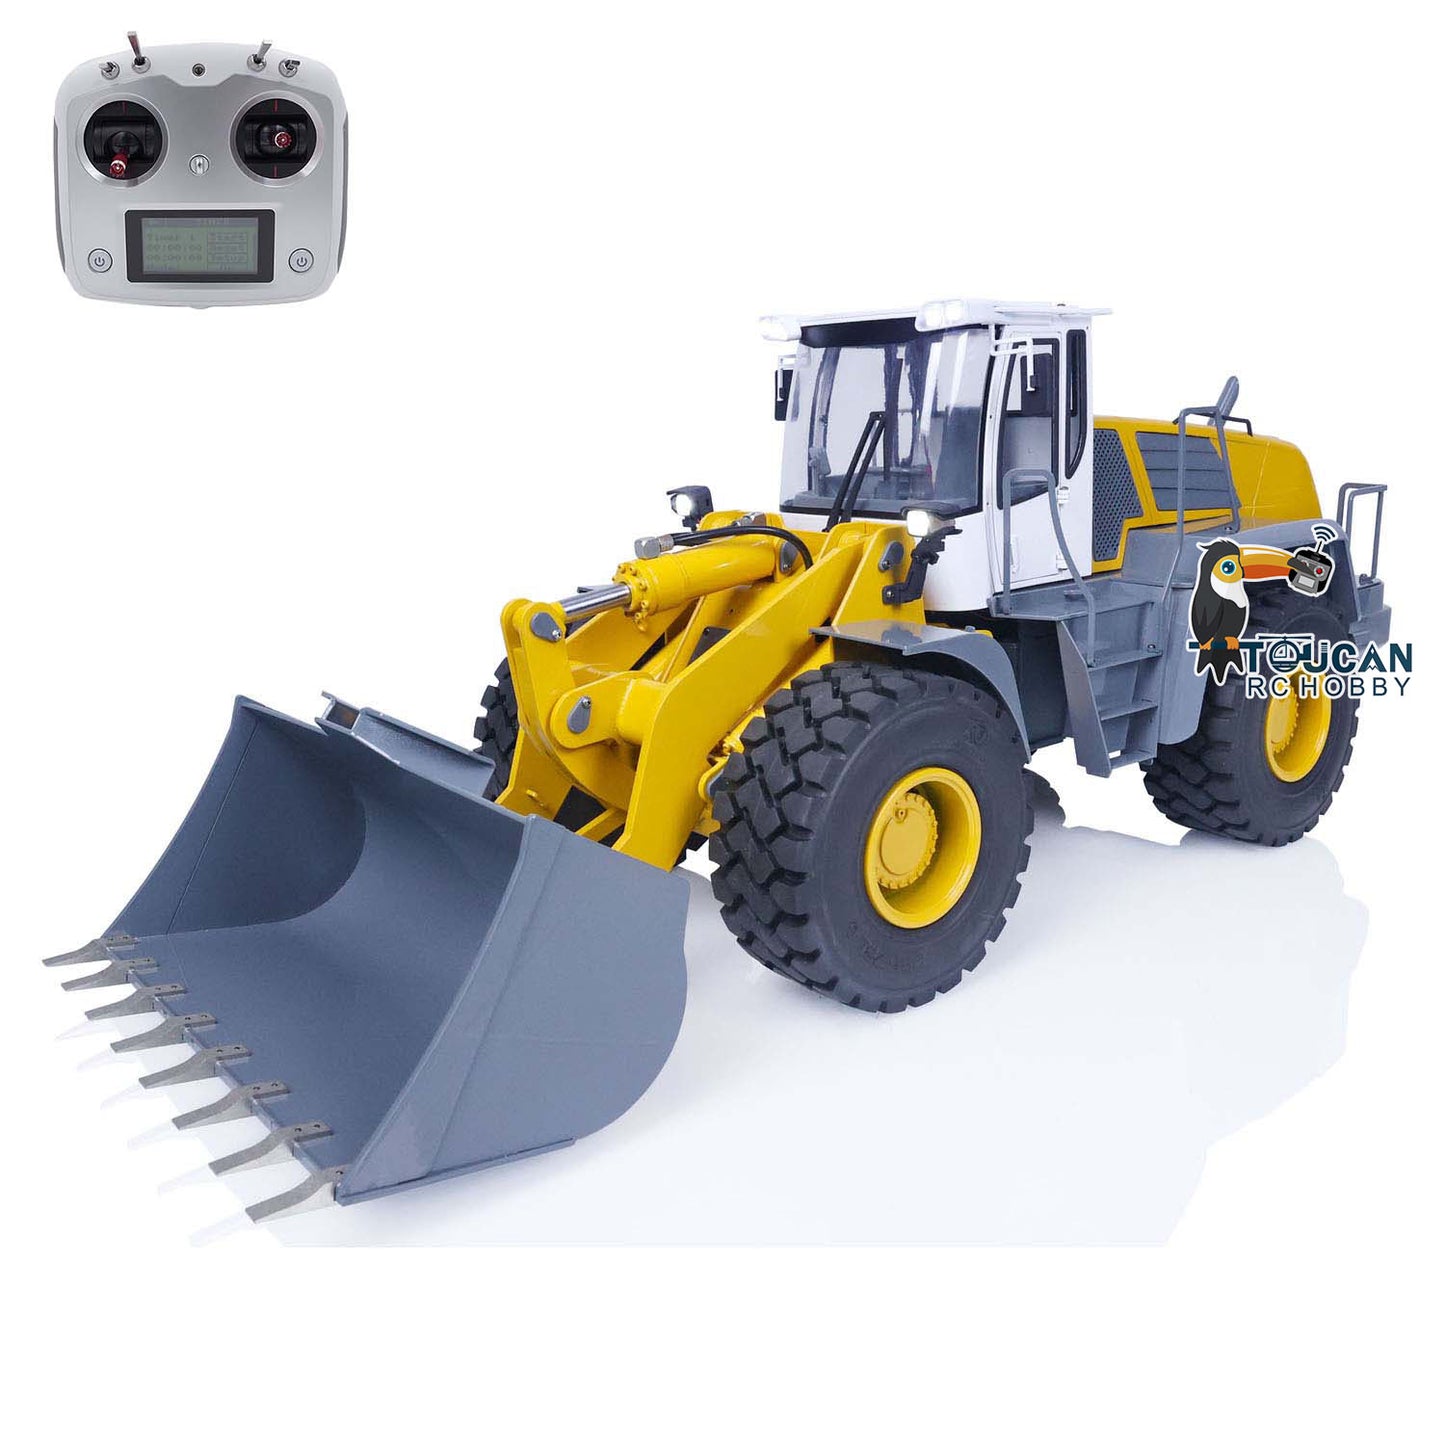 JZM Metal 1/14 580 Assembled Painted RC Hydraulic Loader Remote Control Construction Vehicles Sound Light I6S Radio